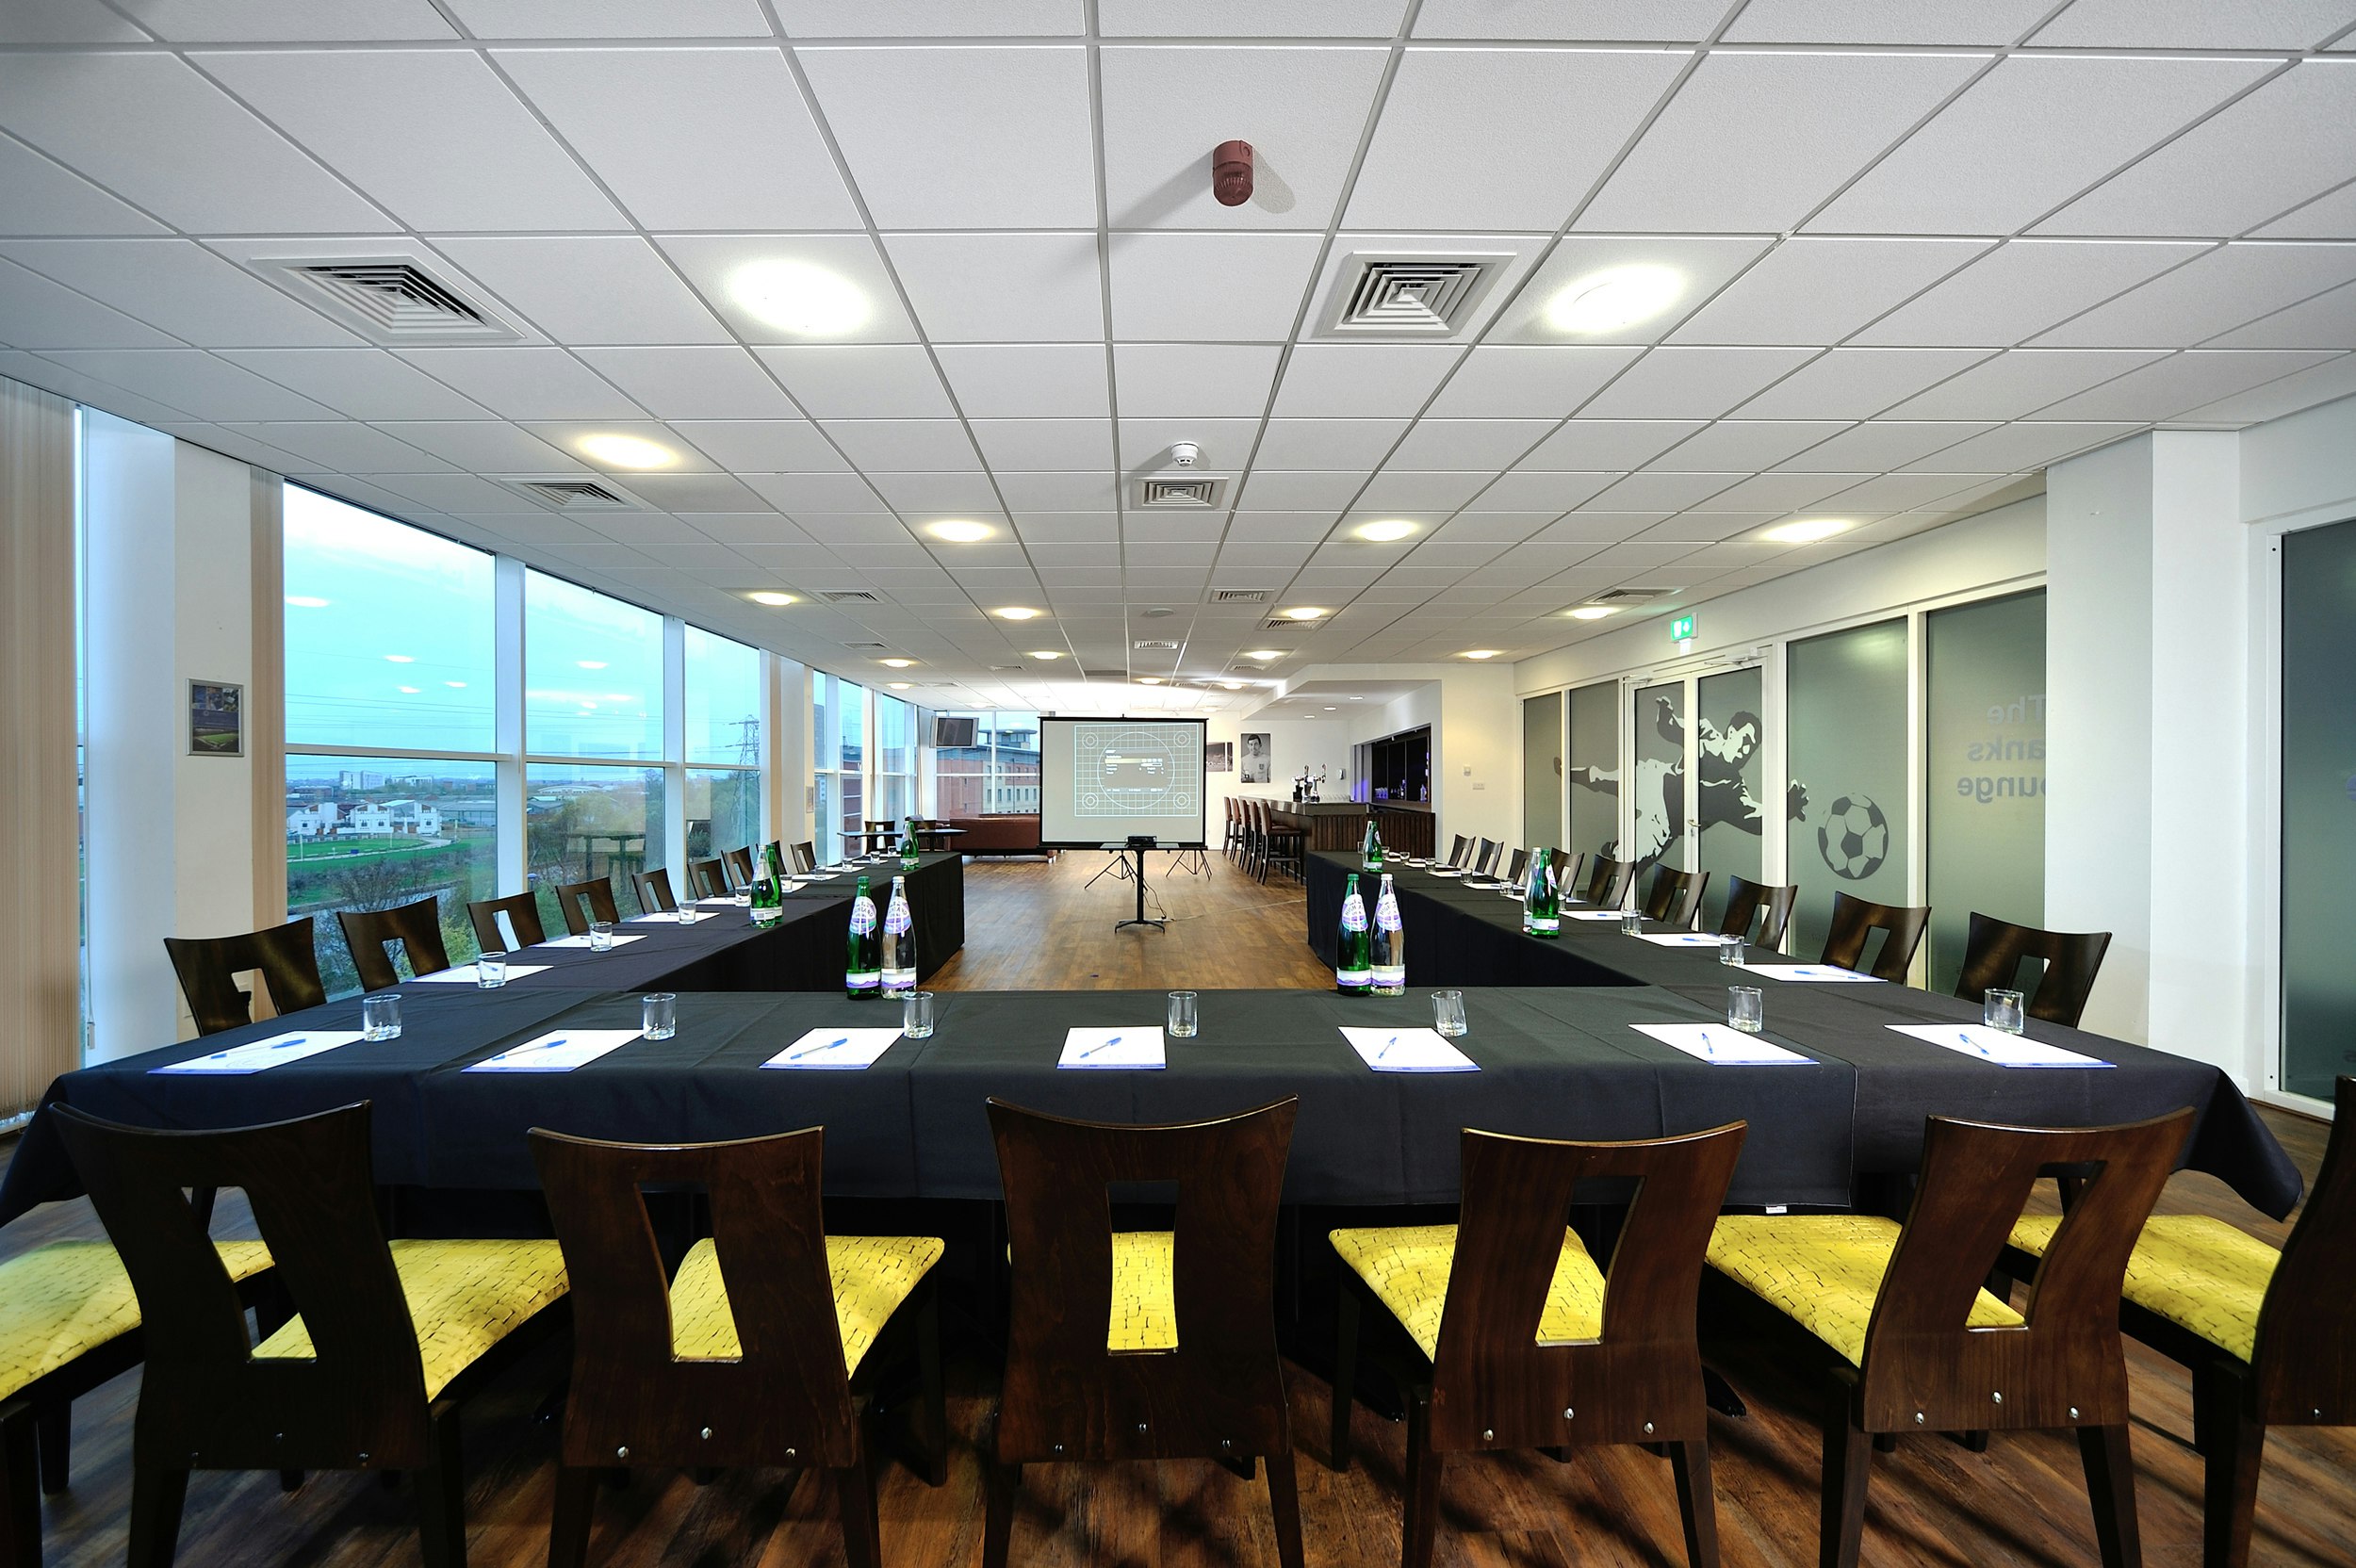 Leicester City Football Club - Banks Lounge image 1